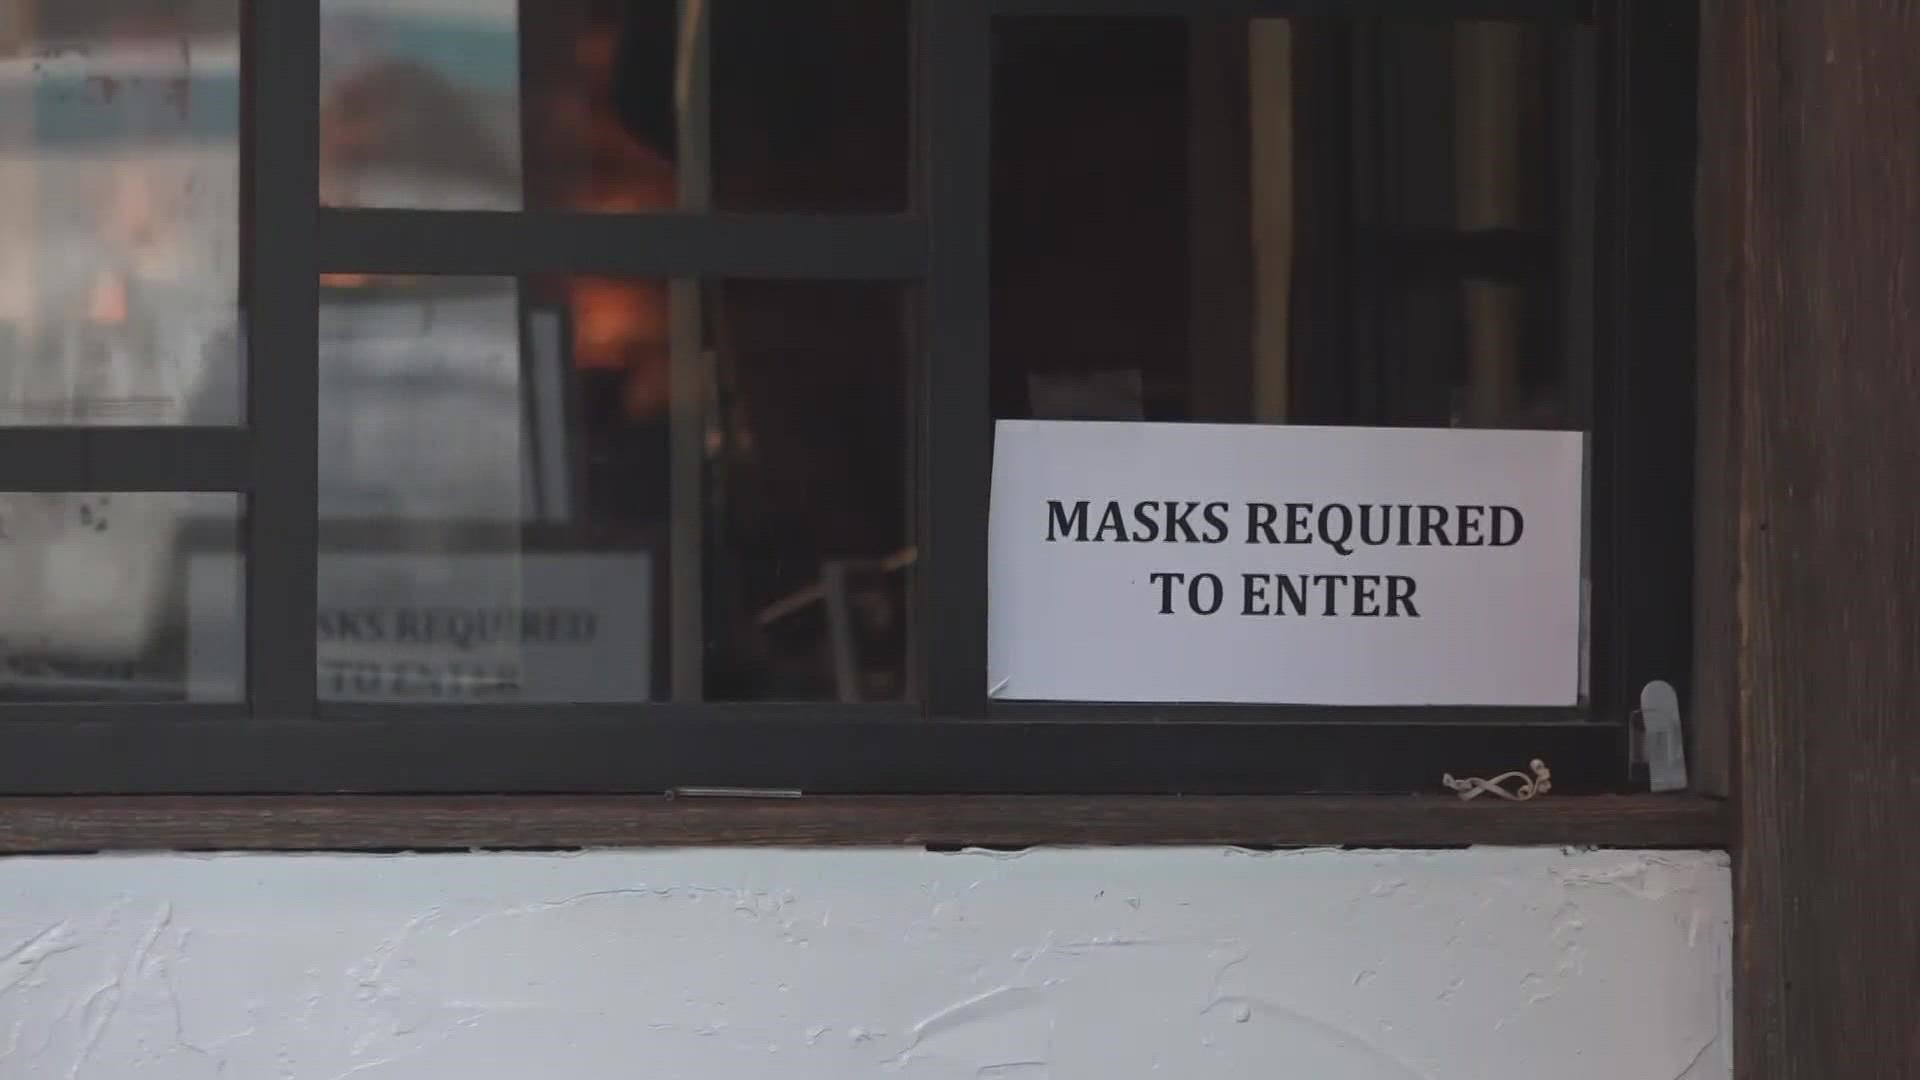 Portland City Council voted 4-4 on implementing an indoor mask mandate. The measure failed Monday, but is expected to be discussed again.